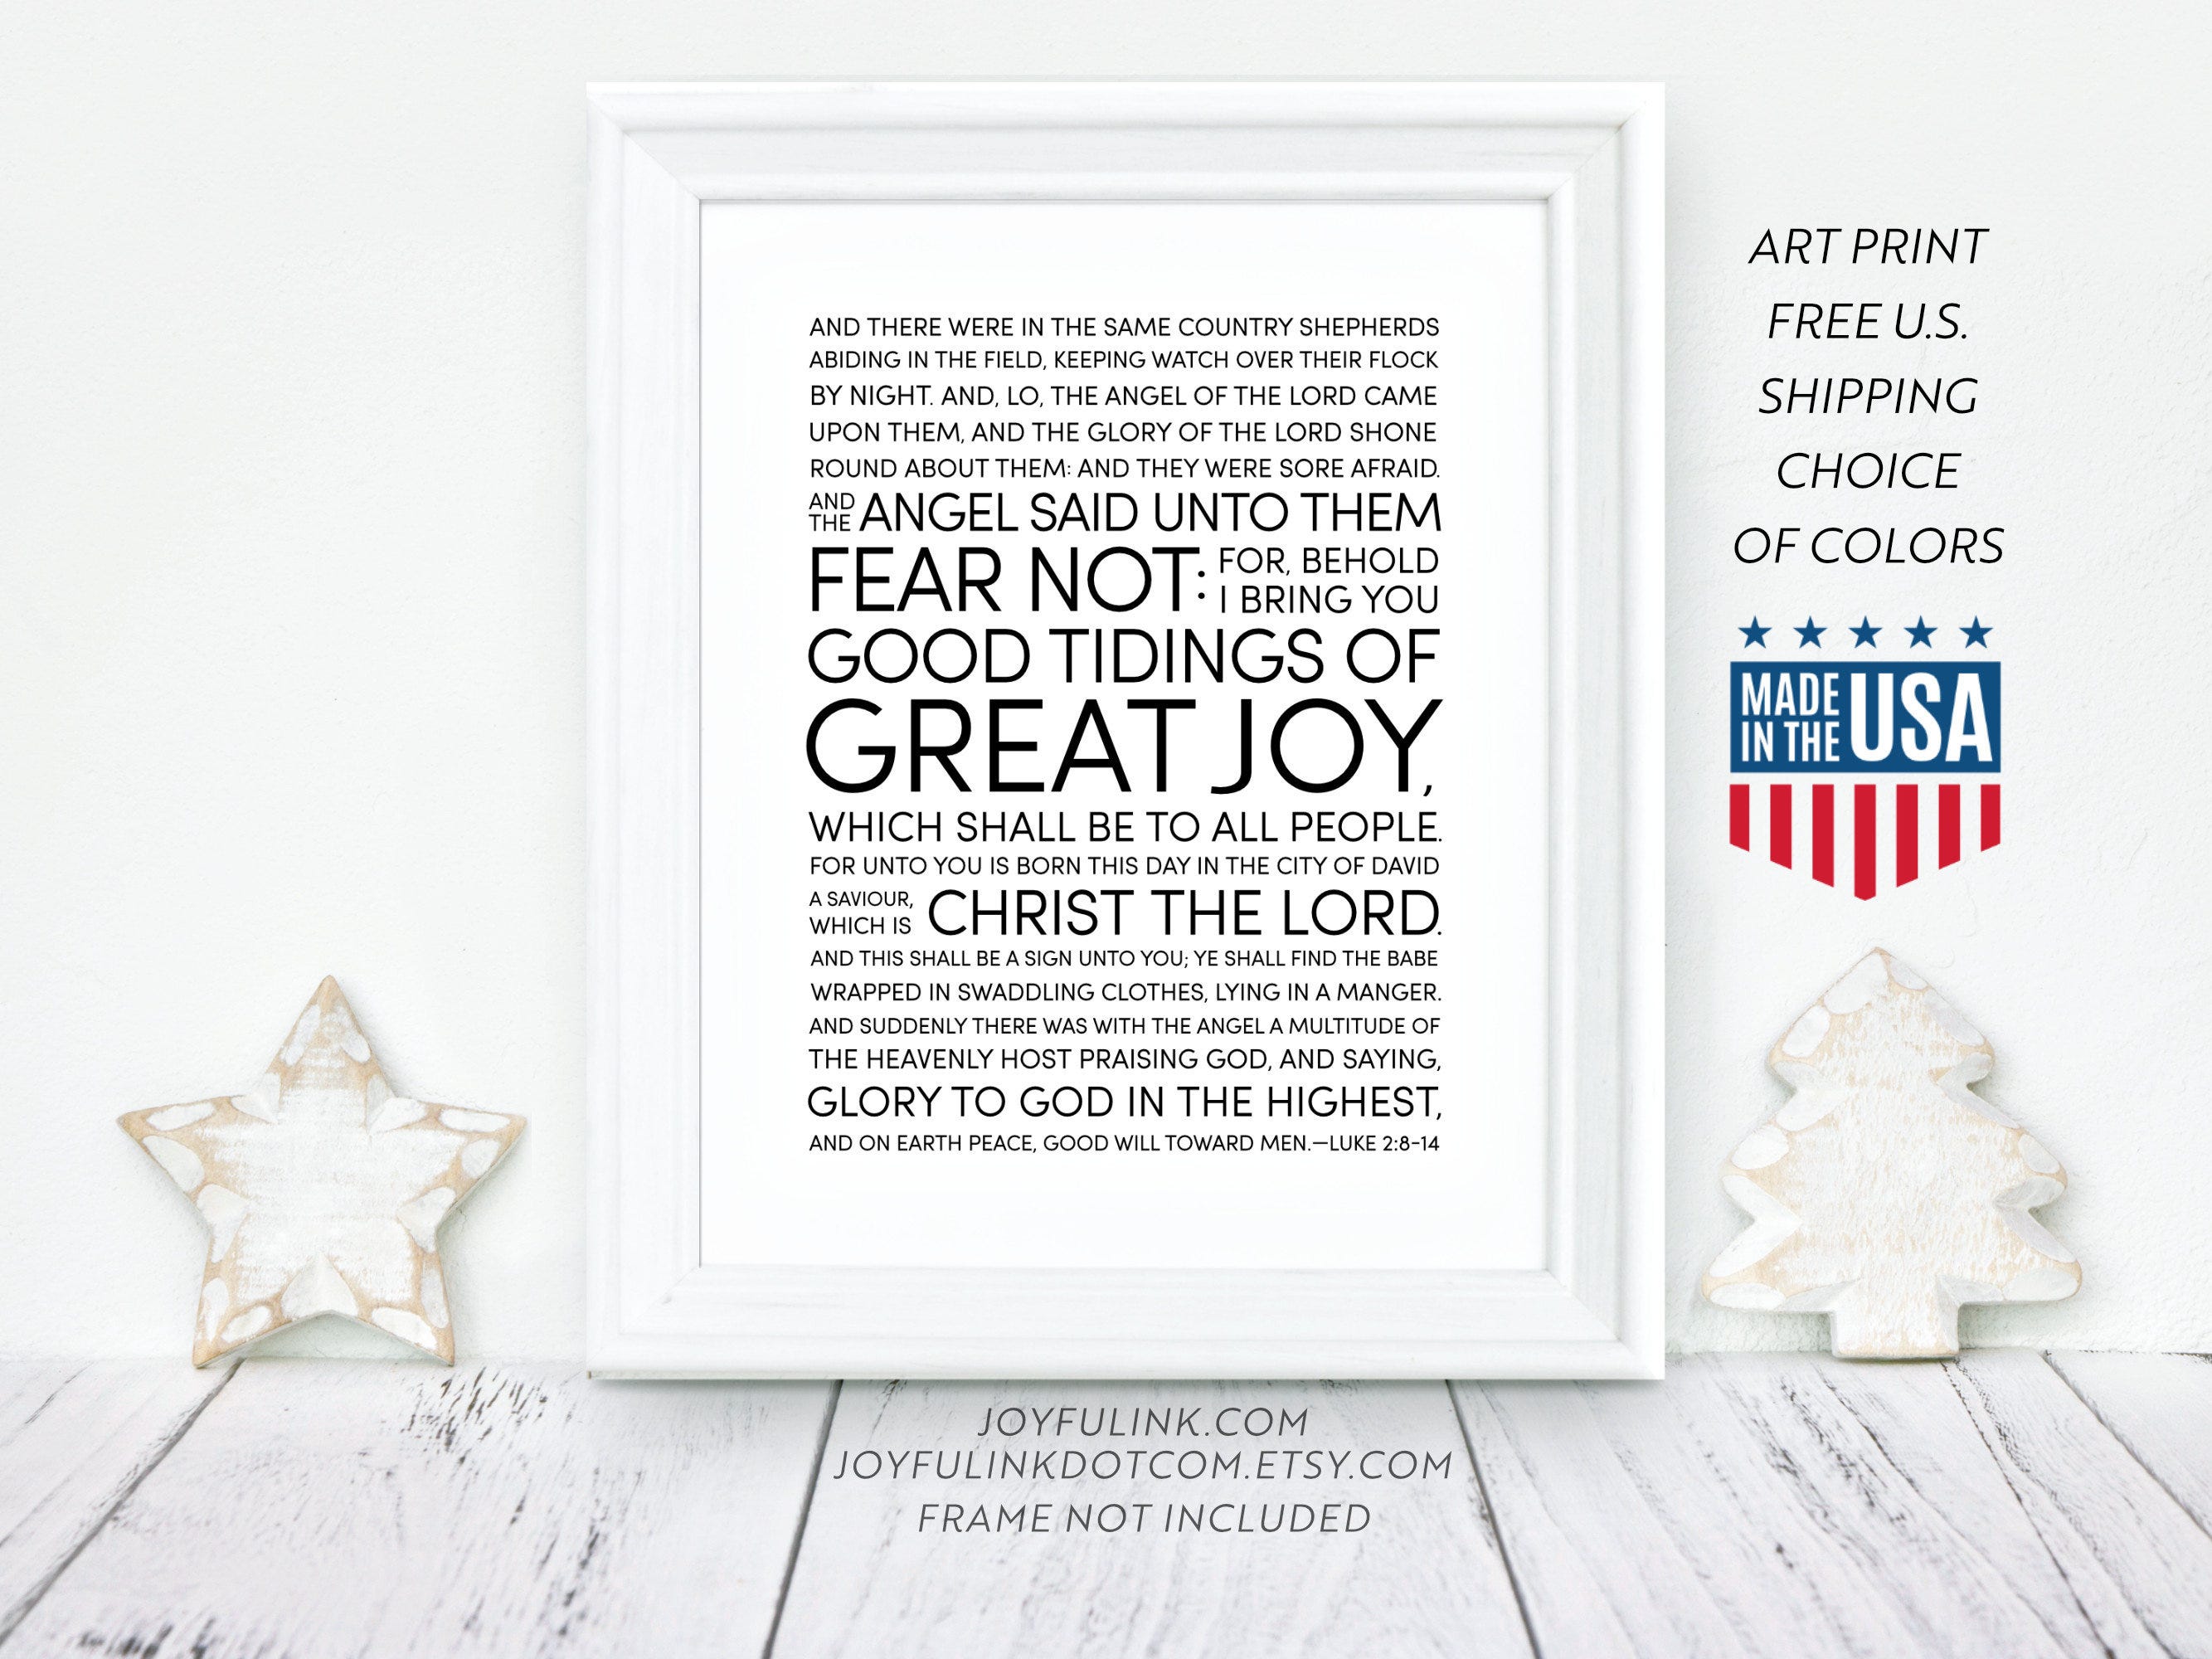 Art Print of Linus Speech, Luke 2:8-14, read in Charlie Brown Christmas. True meaning of Christmas from scripture FREE Shipping in USA.